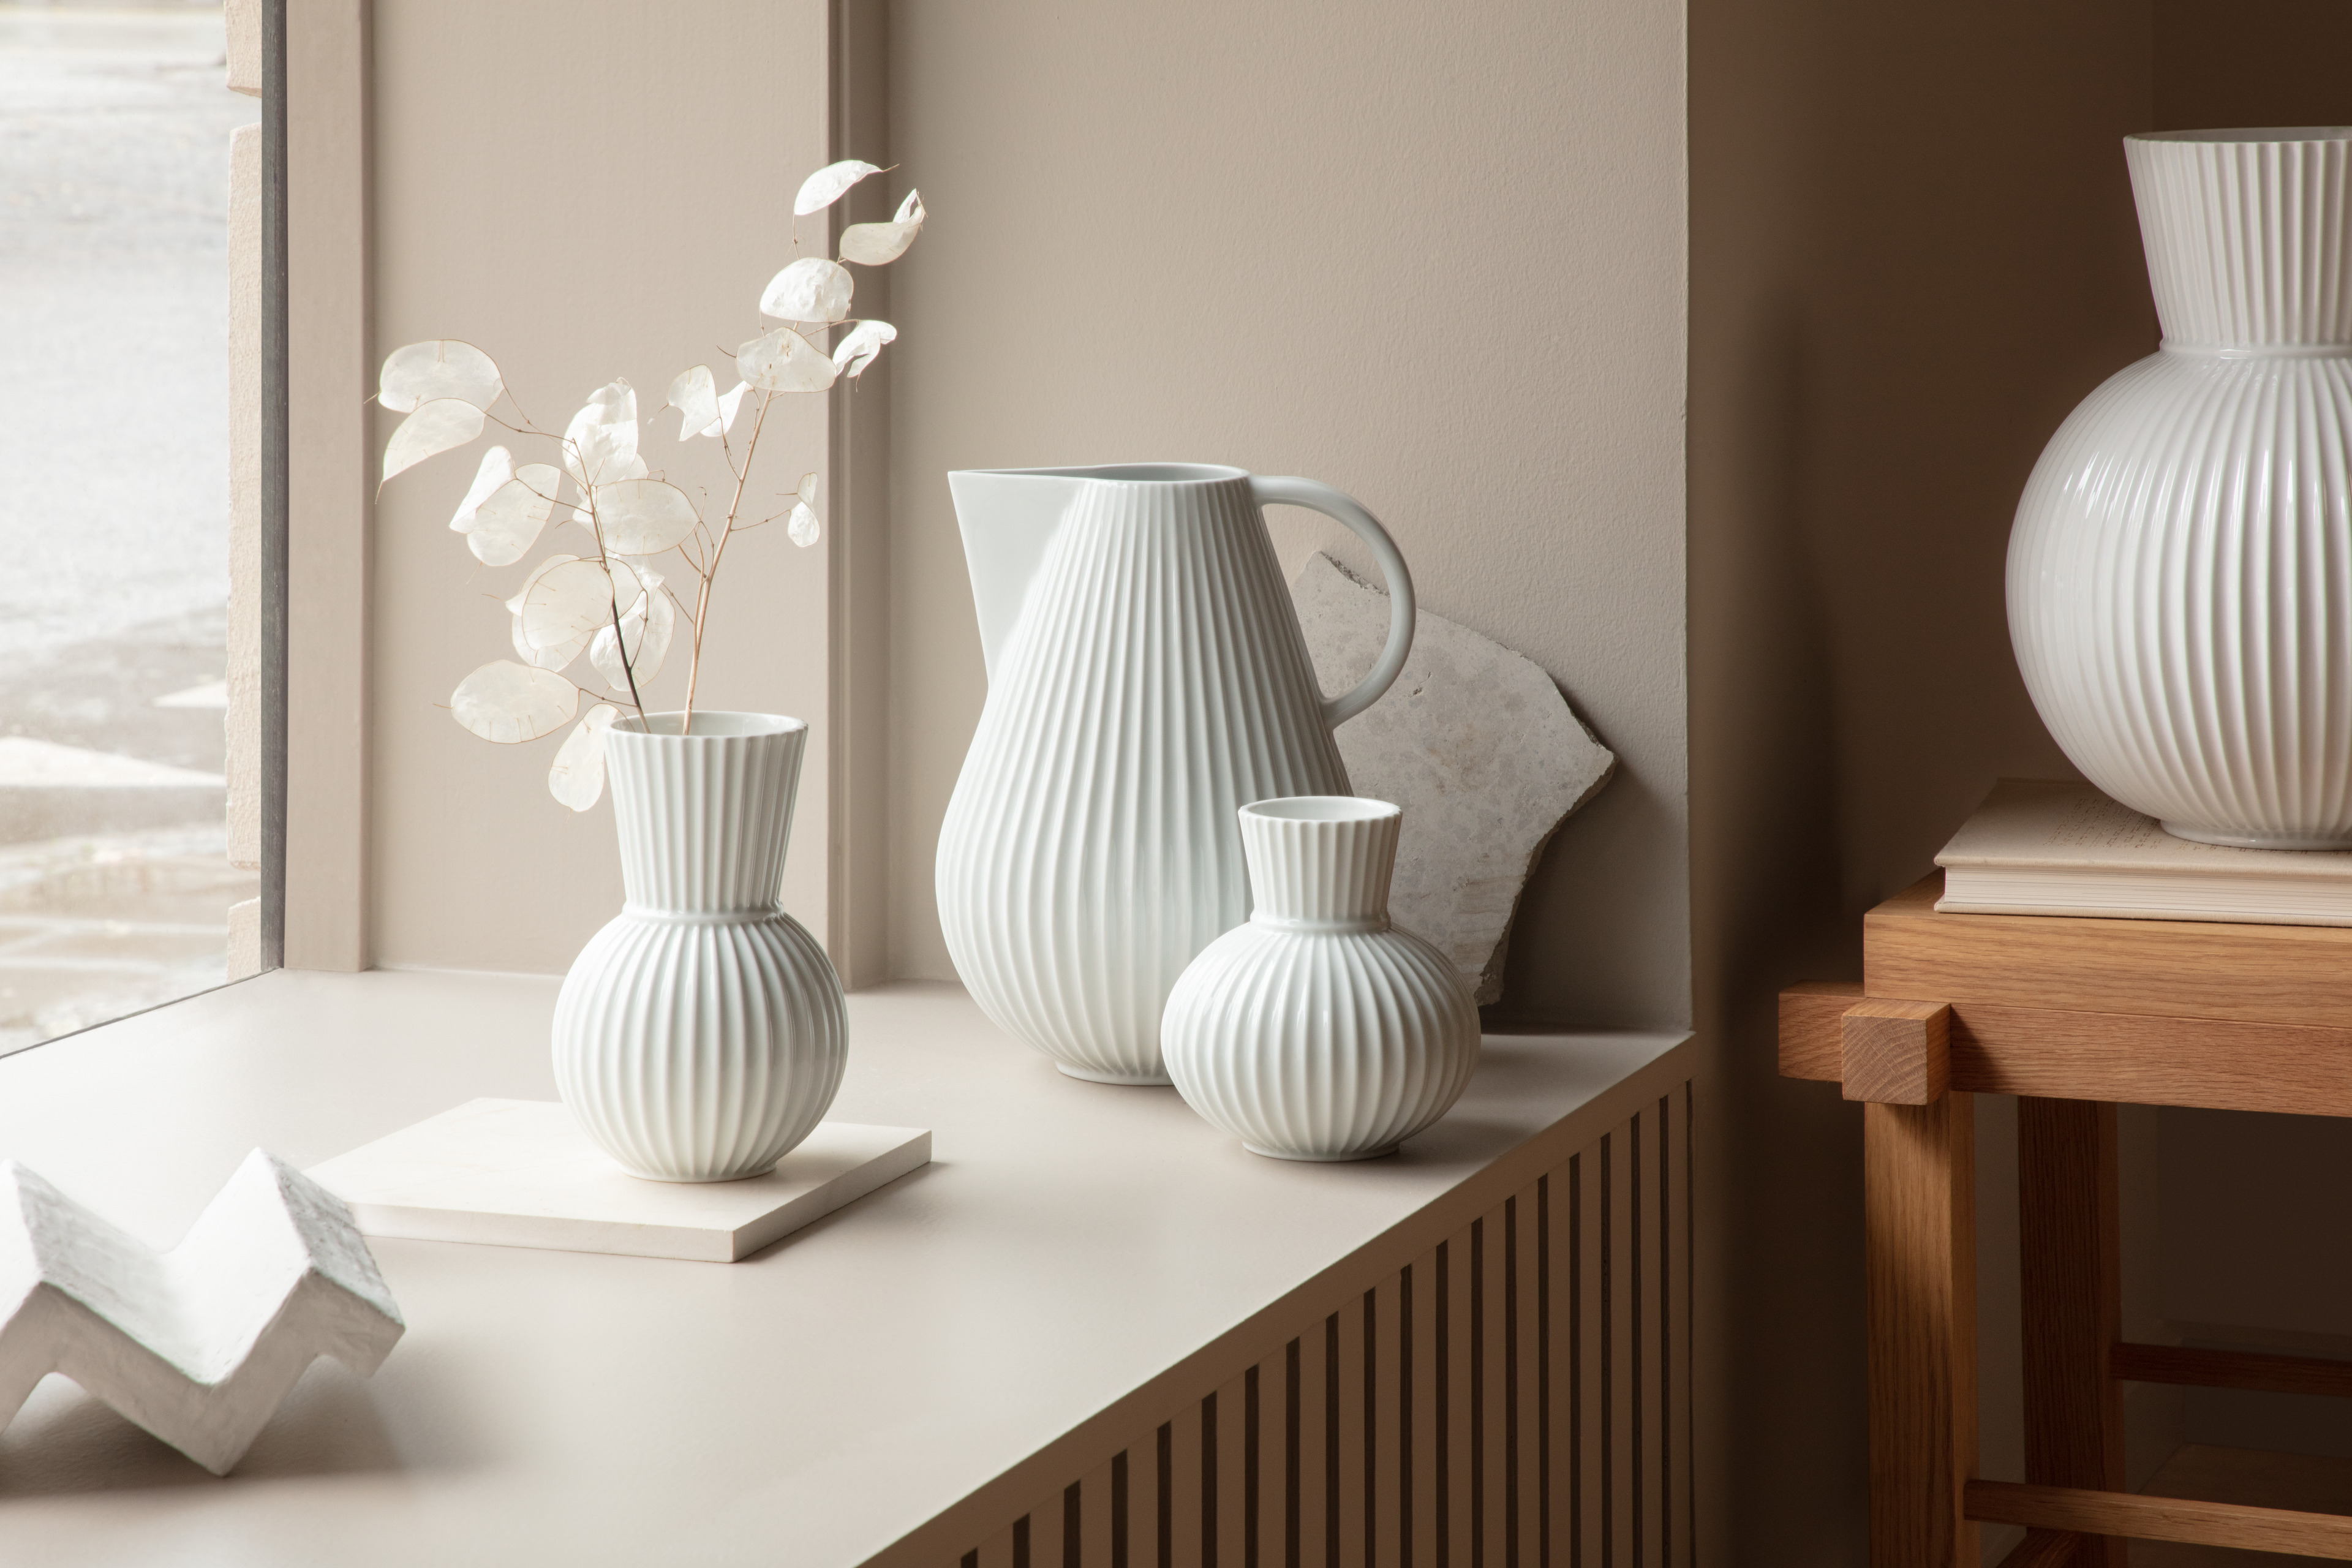 Lyngby Tura are sculptural vases